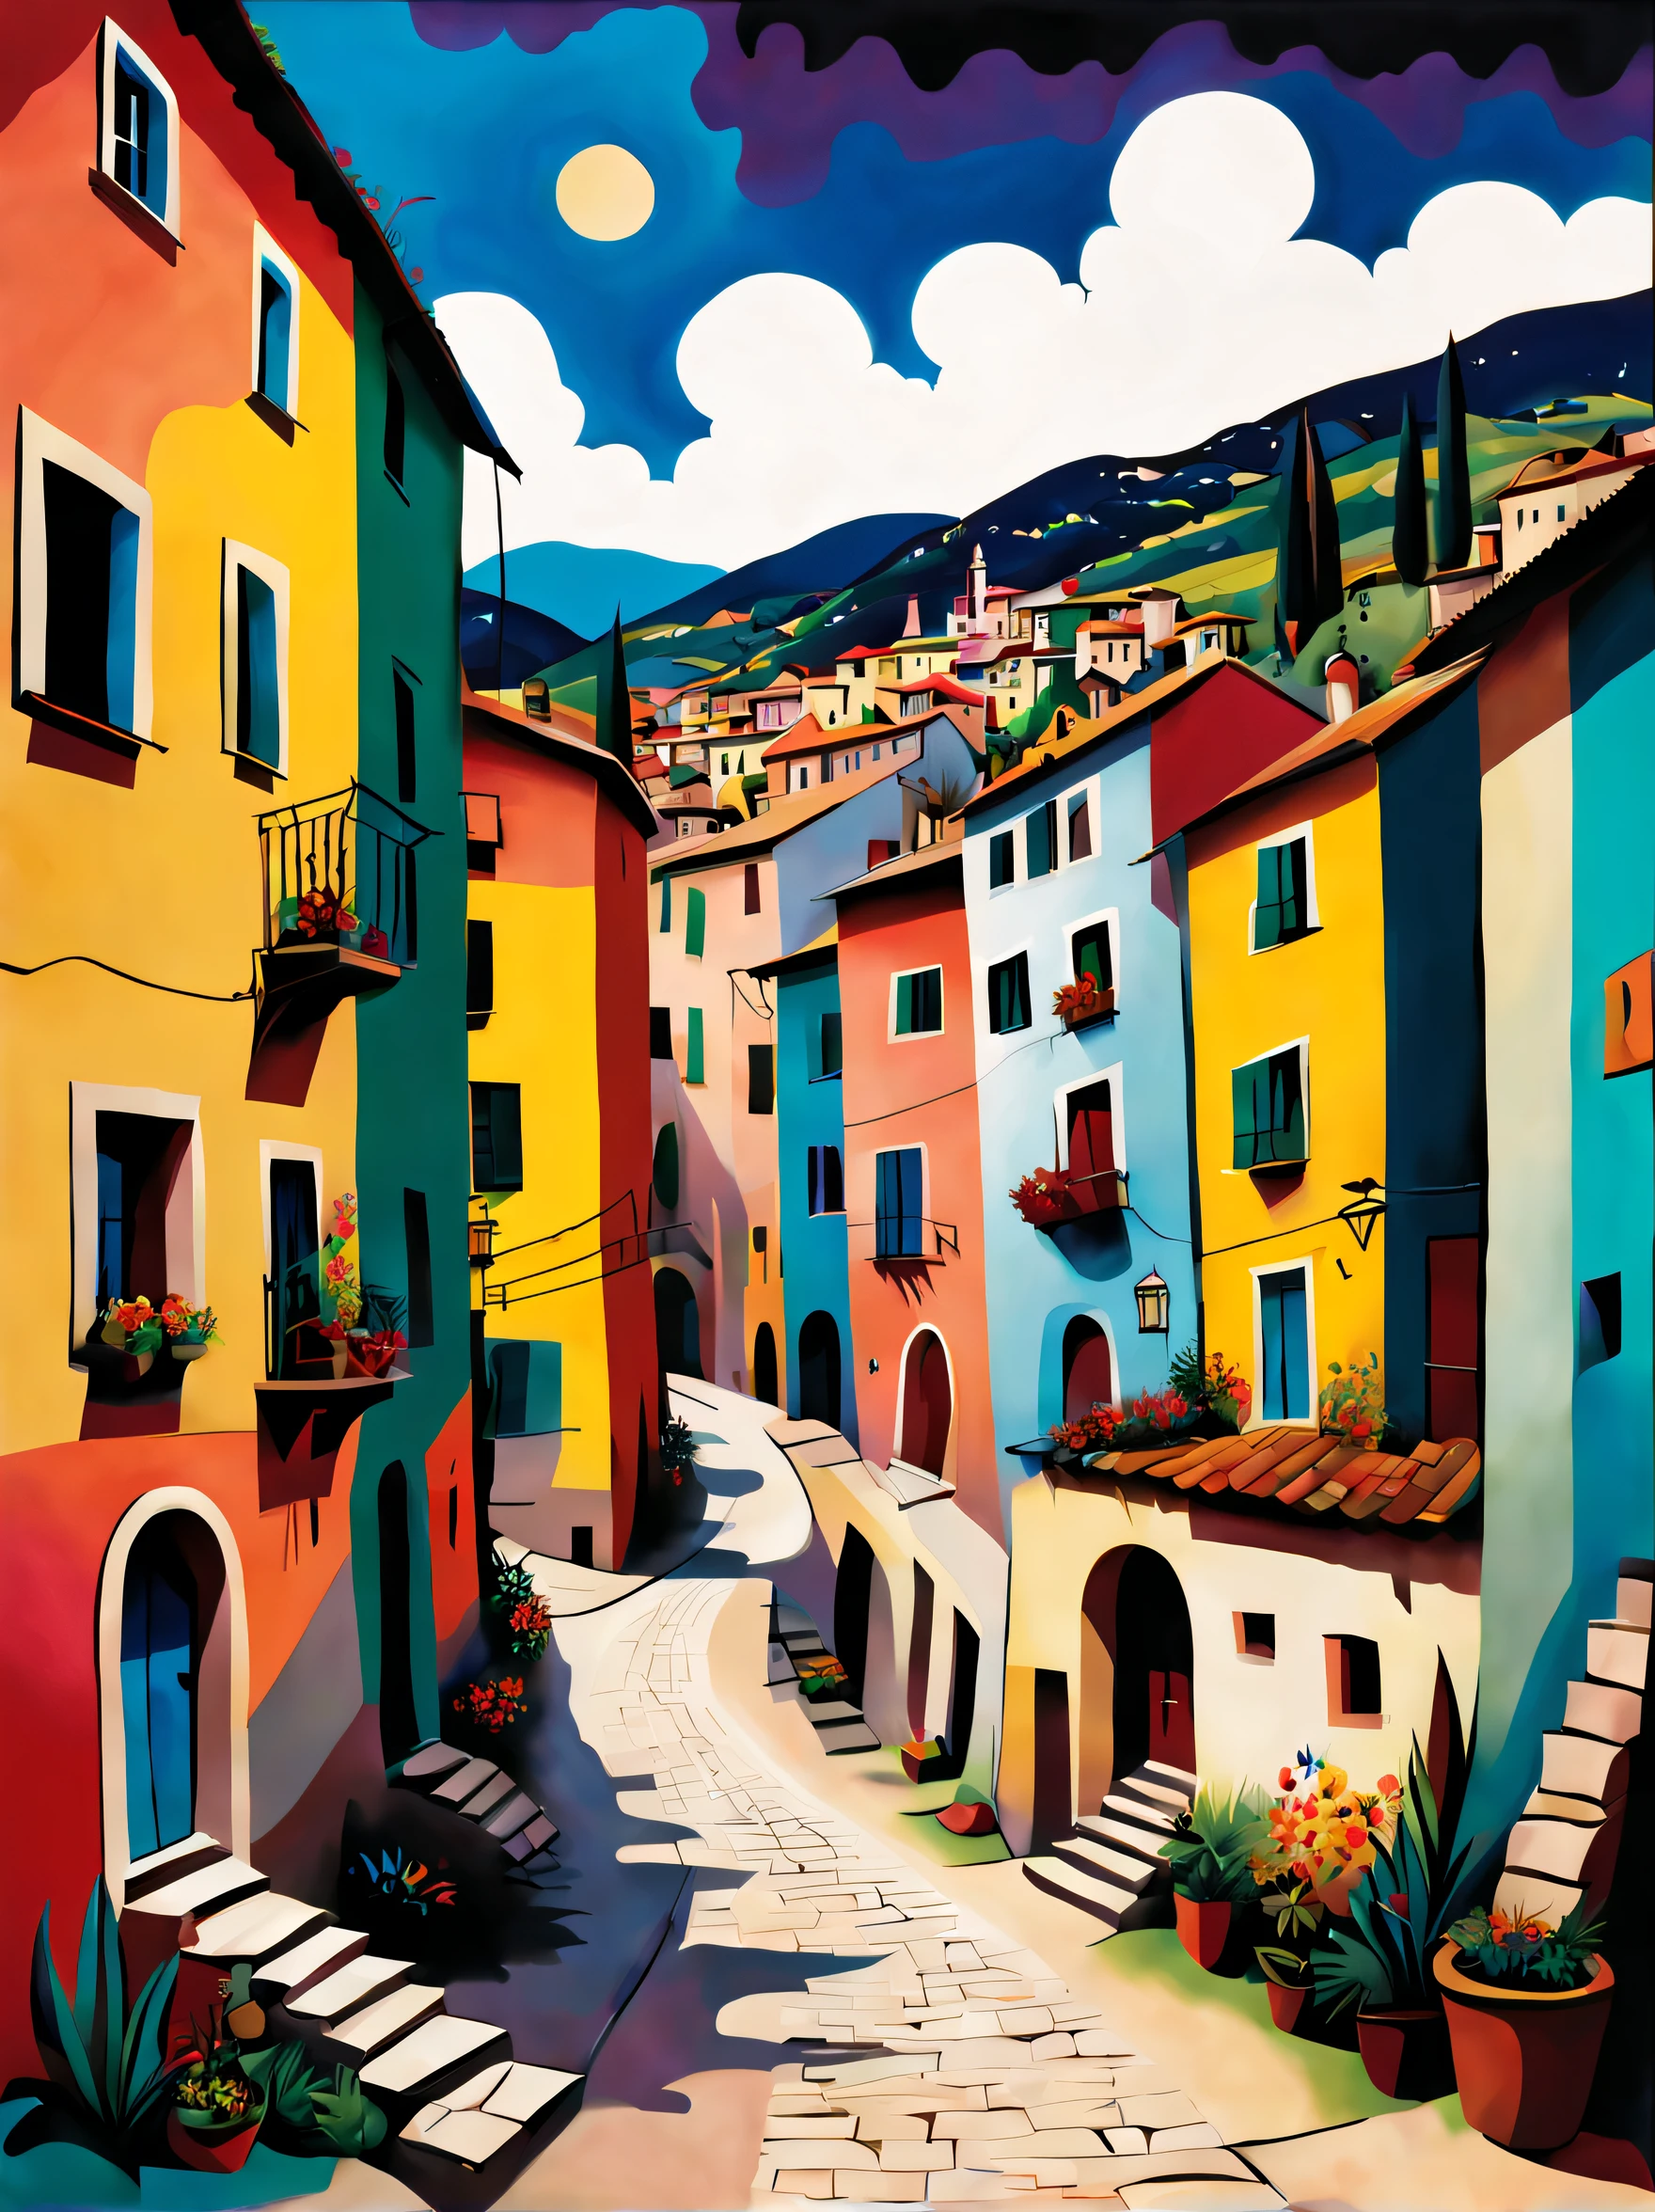 Small Italian village, Kandinsky style, in the Picasso style, iintricate, extremly high detail